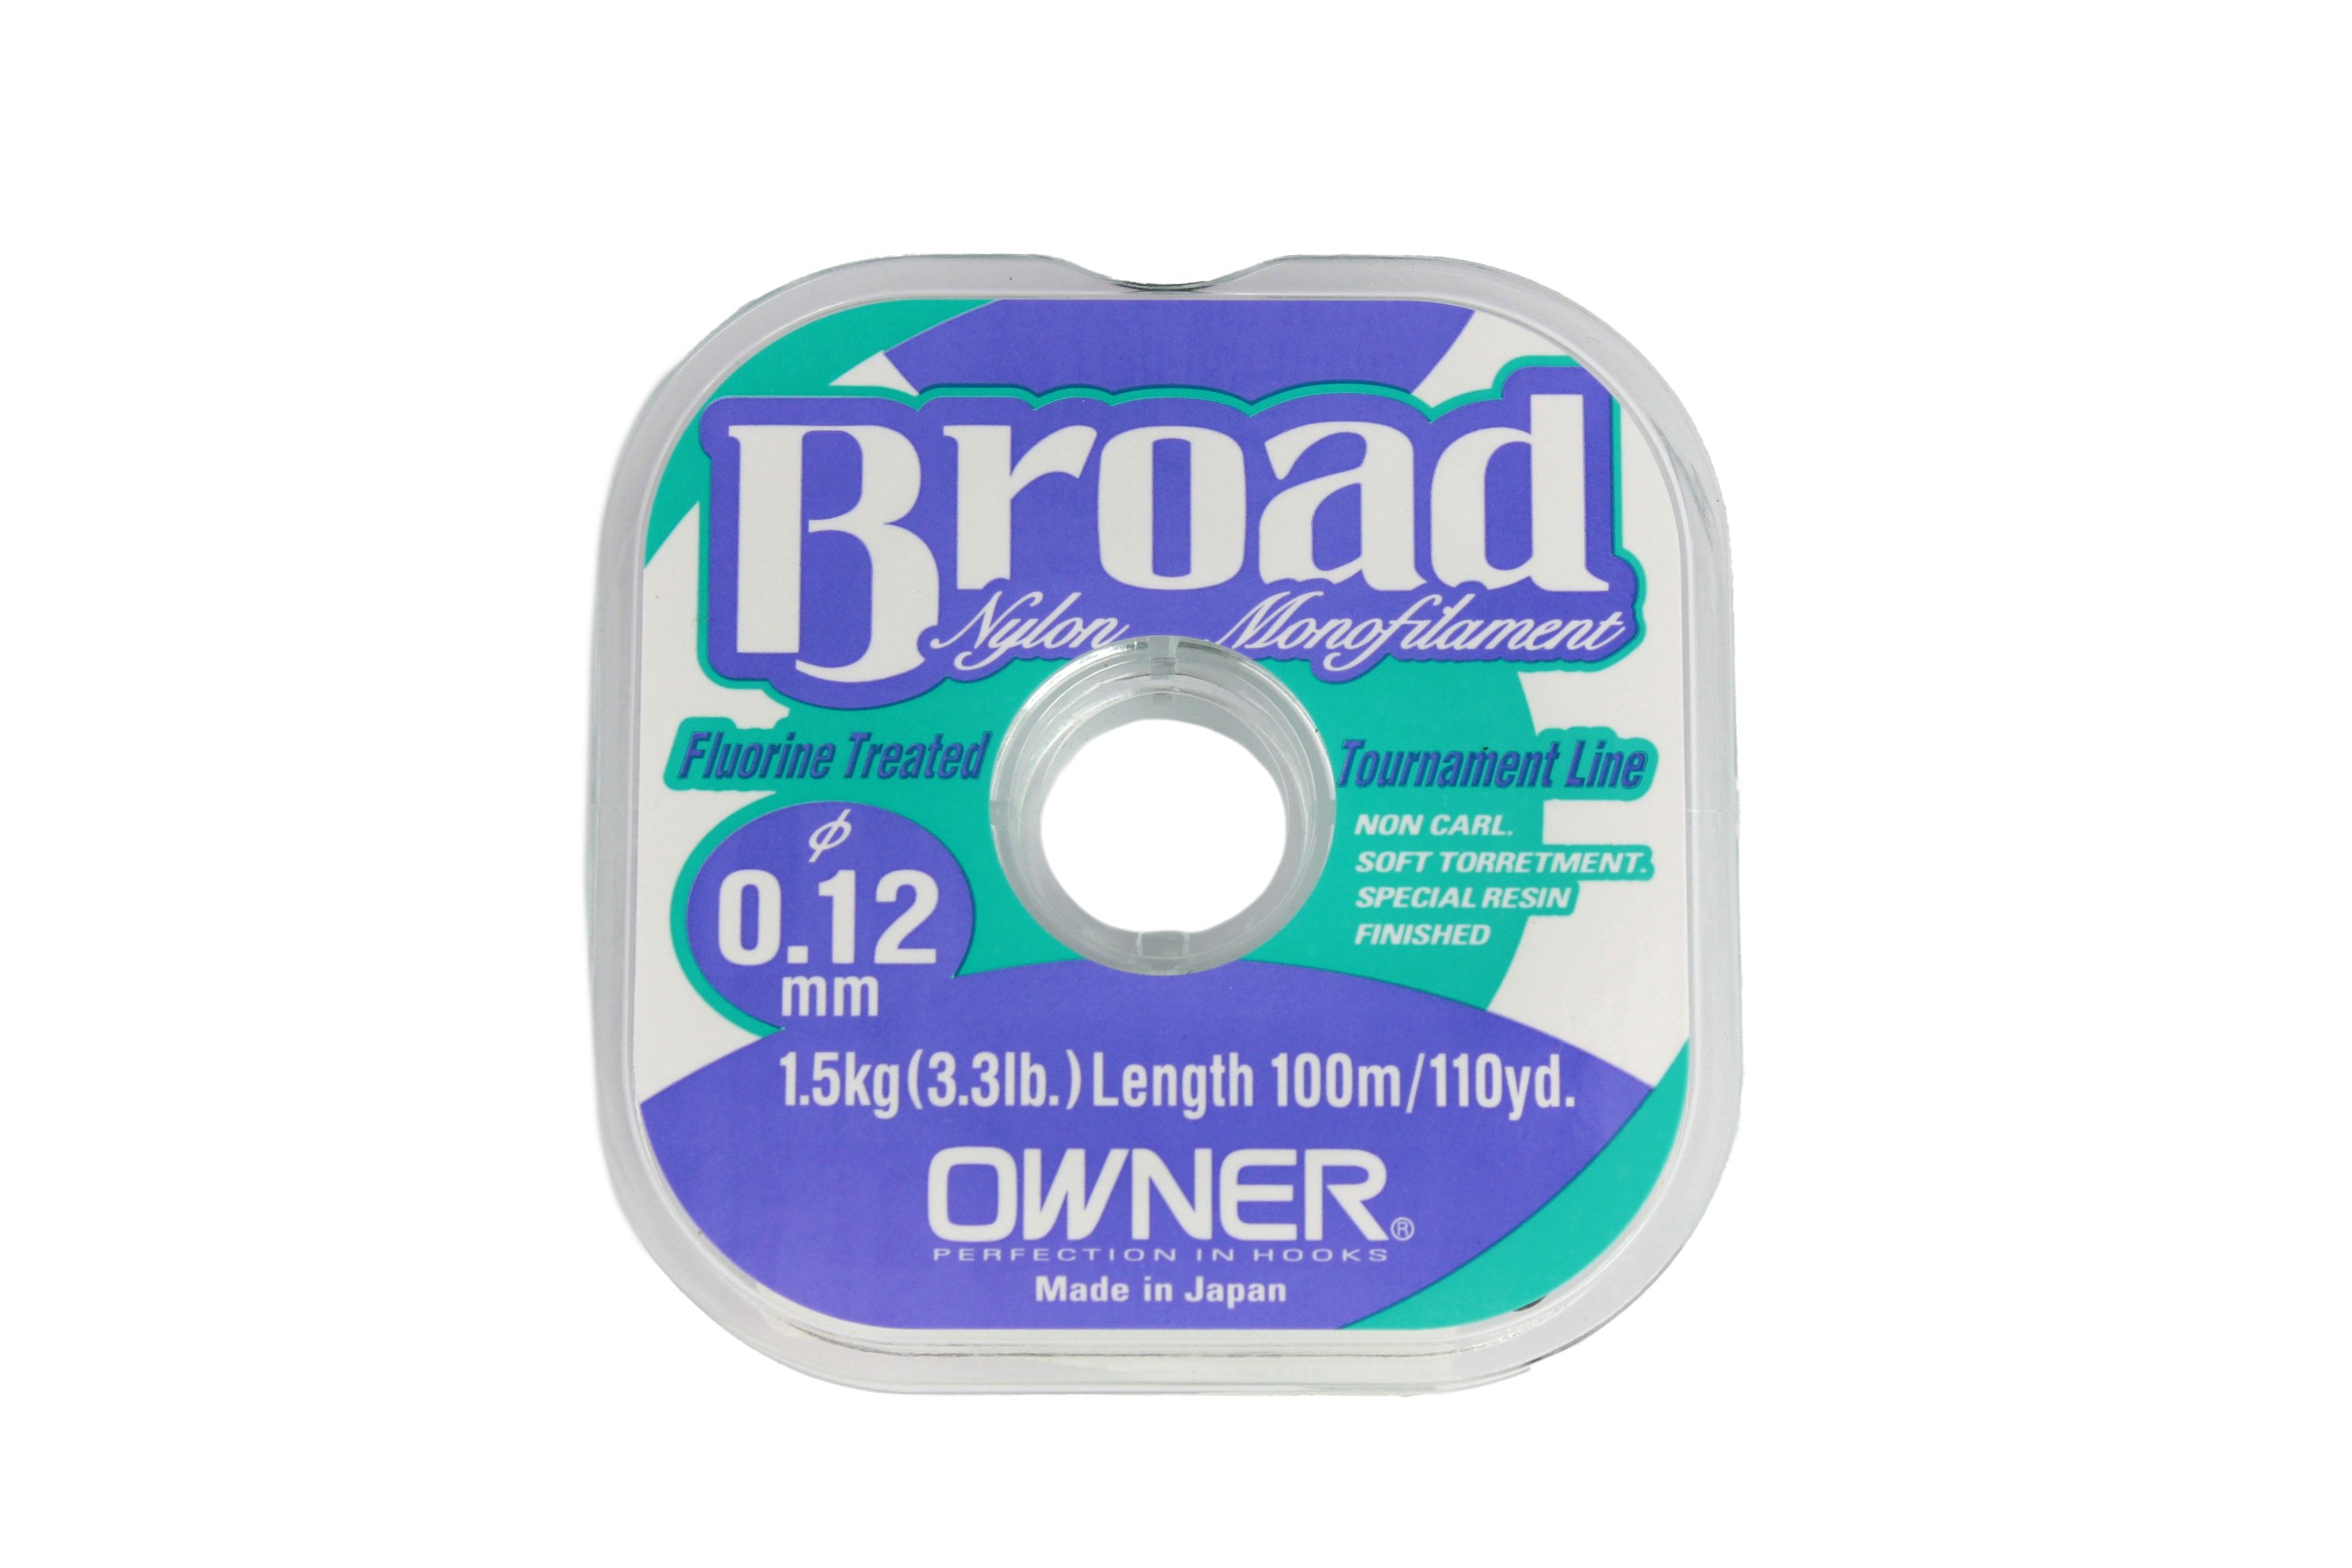 Леска Owner Broad Natural Clear 100м 0,12мм